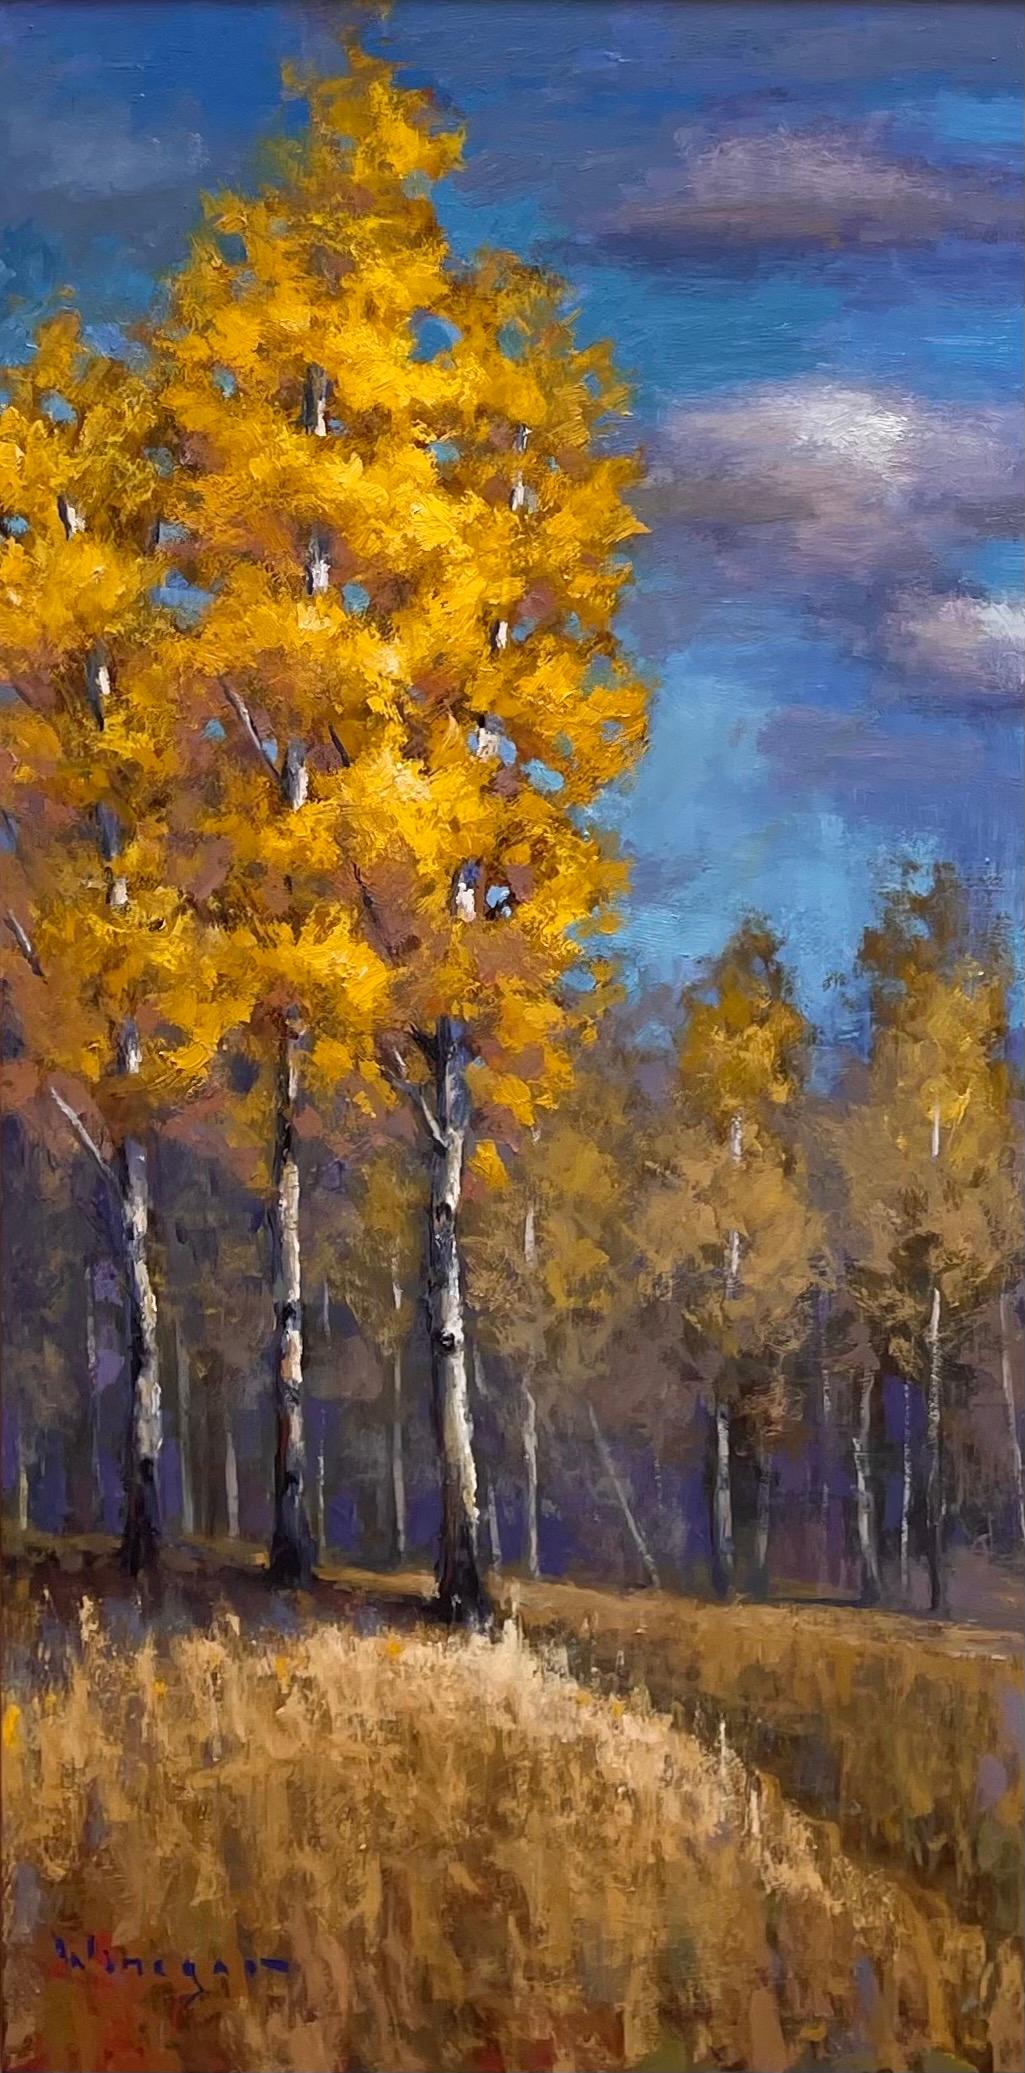 Seth Winegar Figurative Painting - "Gold on the Trees" Oil painting